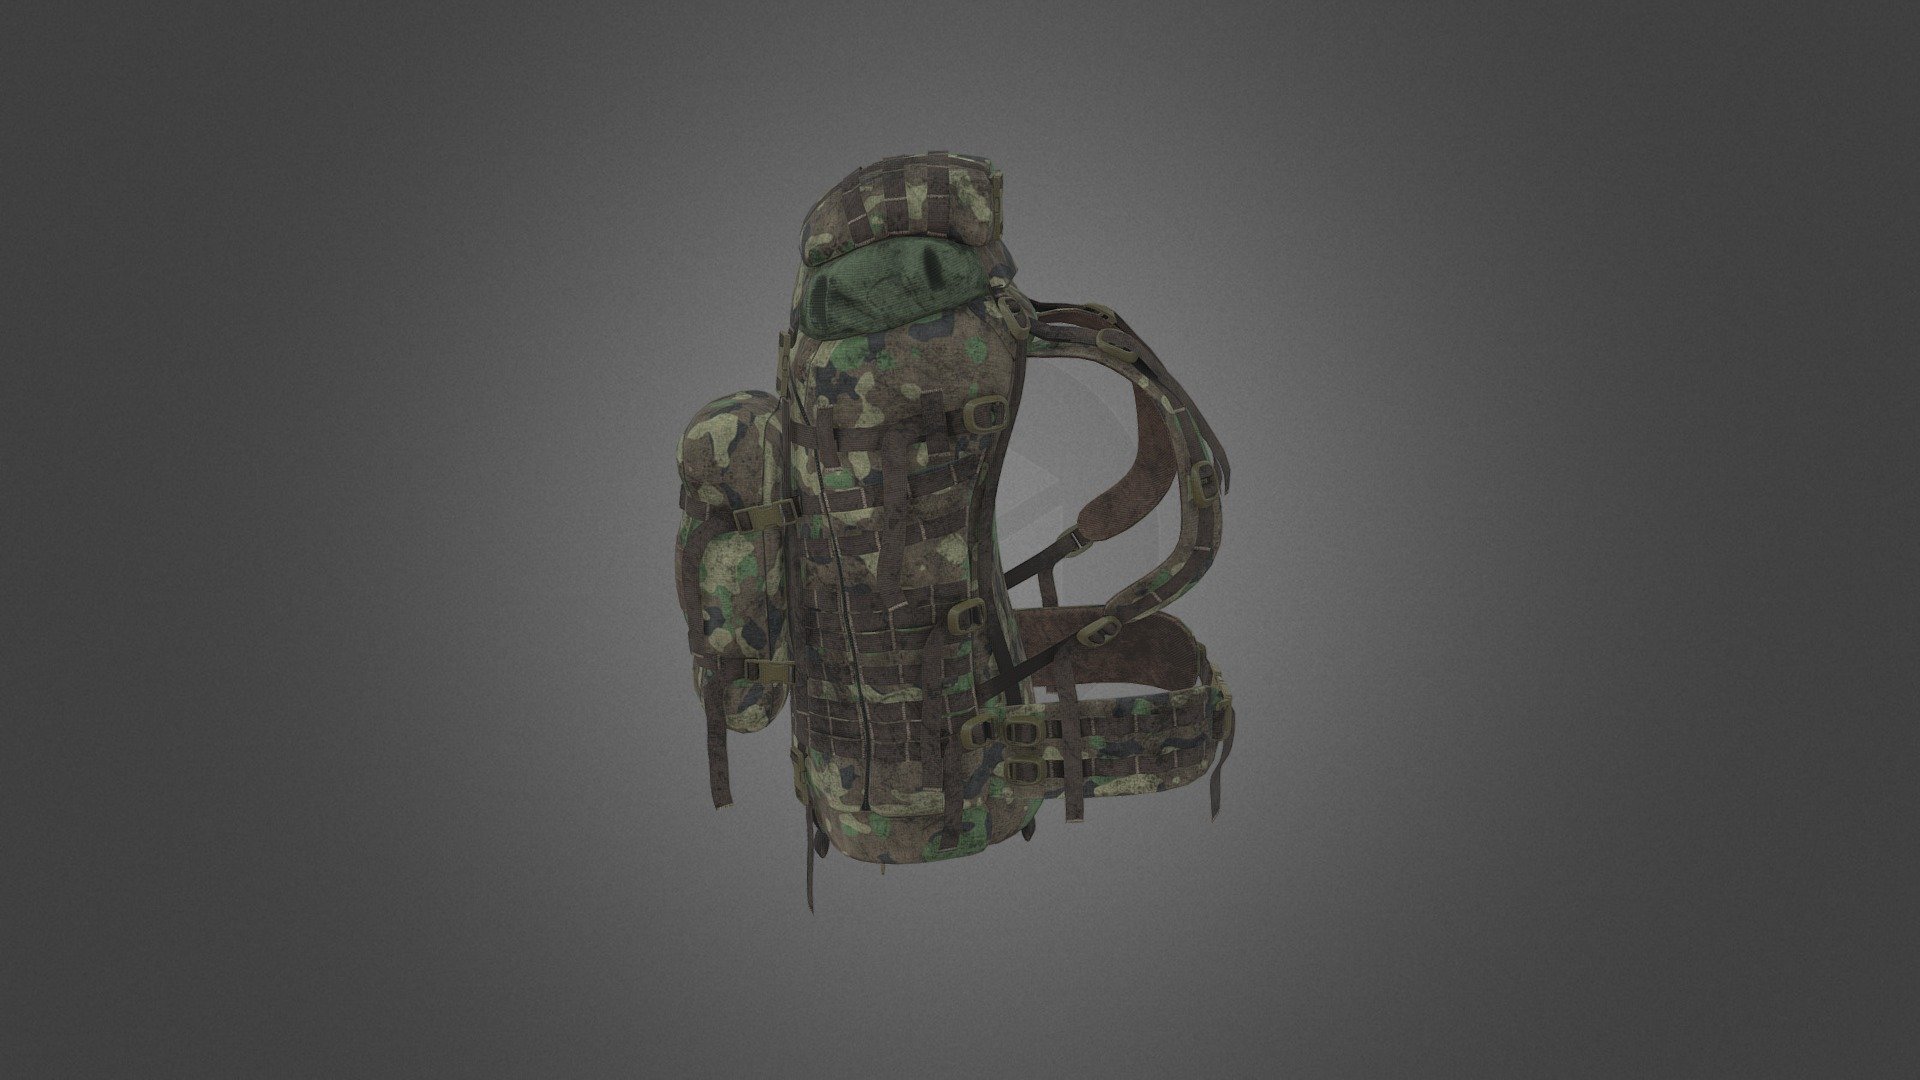 Camo pattern: Woodland

Process Workflow :

Blockout Shape - Zbrush
High Poly Sculpt - Zbrush 
Retopology - Blender 
Texturing - Substance Painter.

50 K tris - Military Backpack (Dirty) - 3D model by driaque 3d model